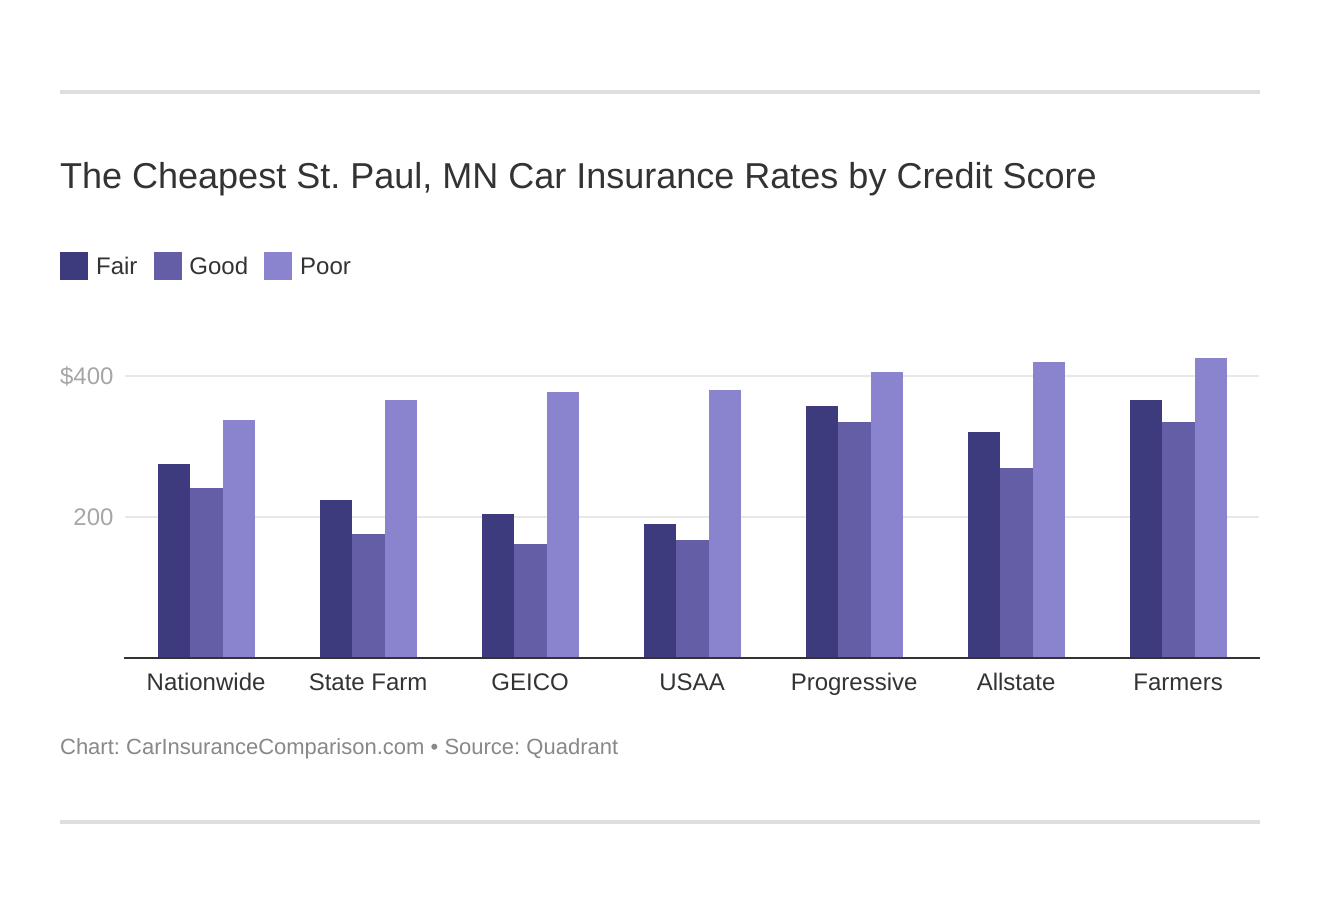 The Cheapest St. Paul, MN Car Insurance Rates by Credit Score